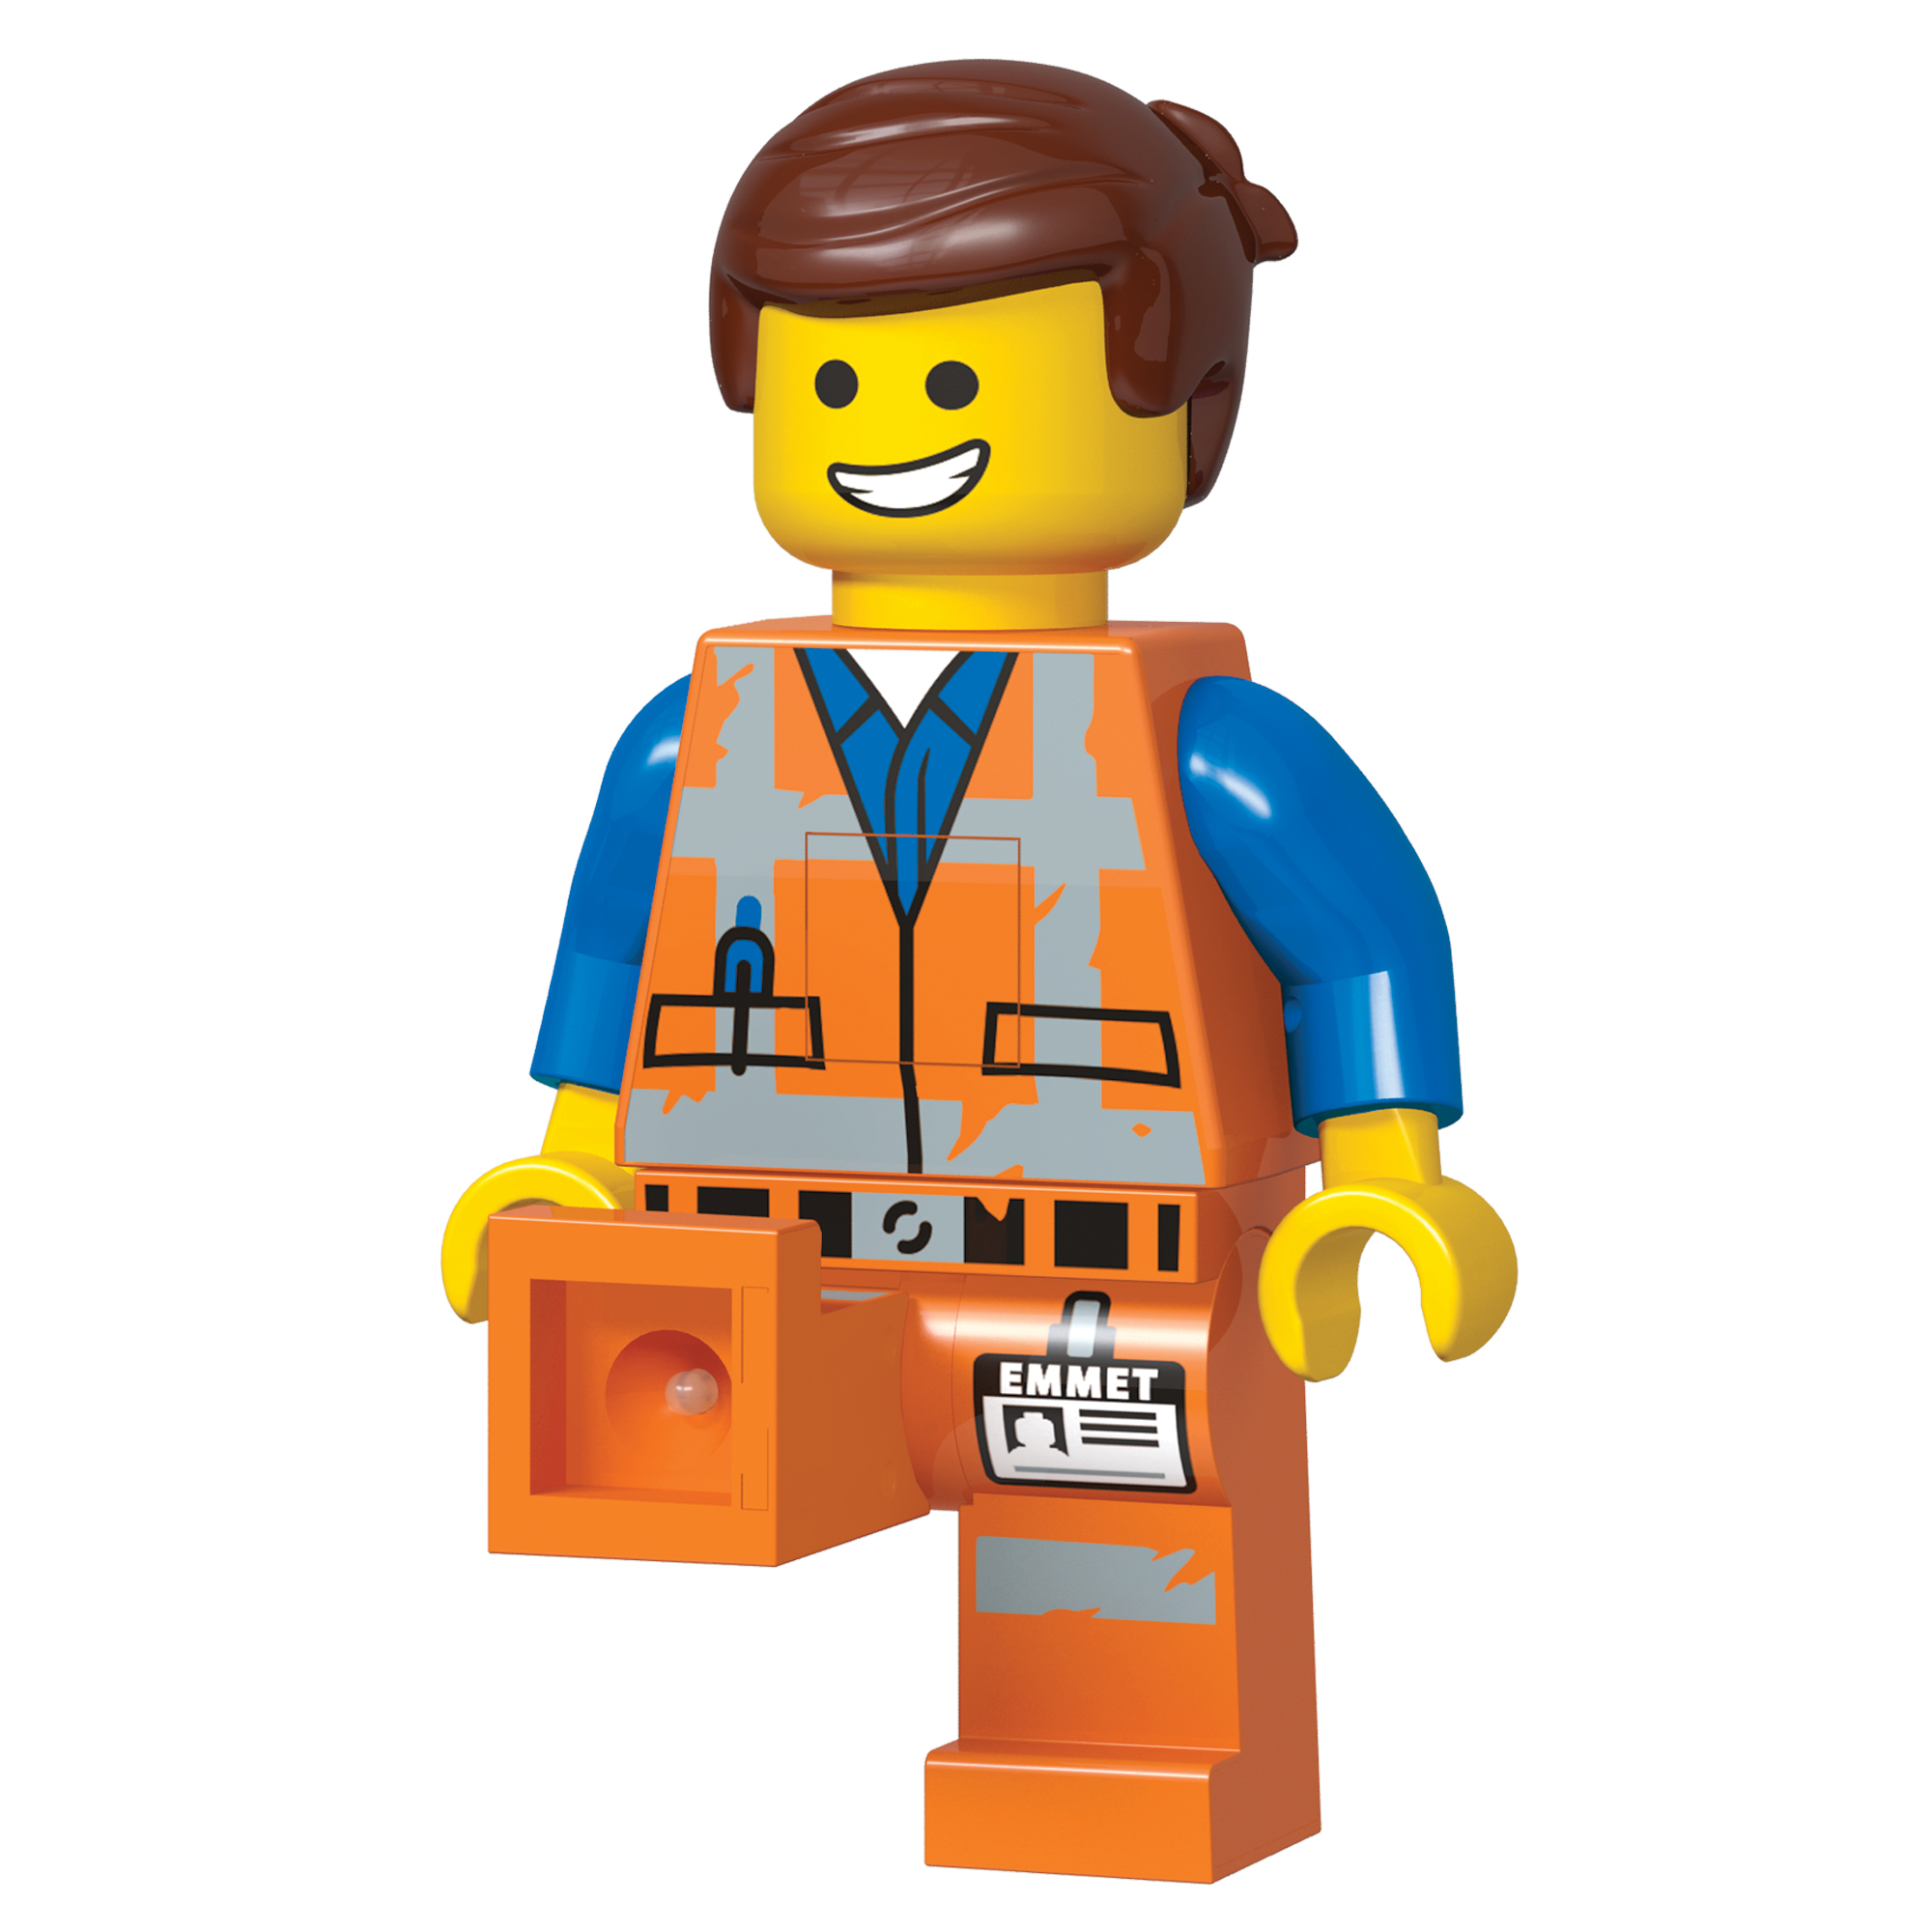 The LEGO Movie 2 Torch, Emmet - image 2 of 3